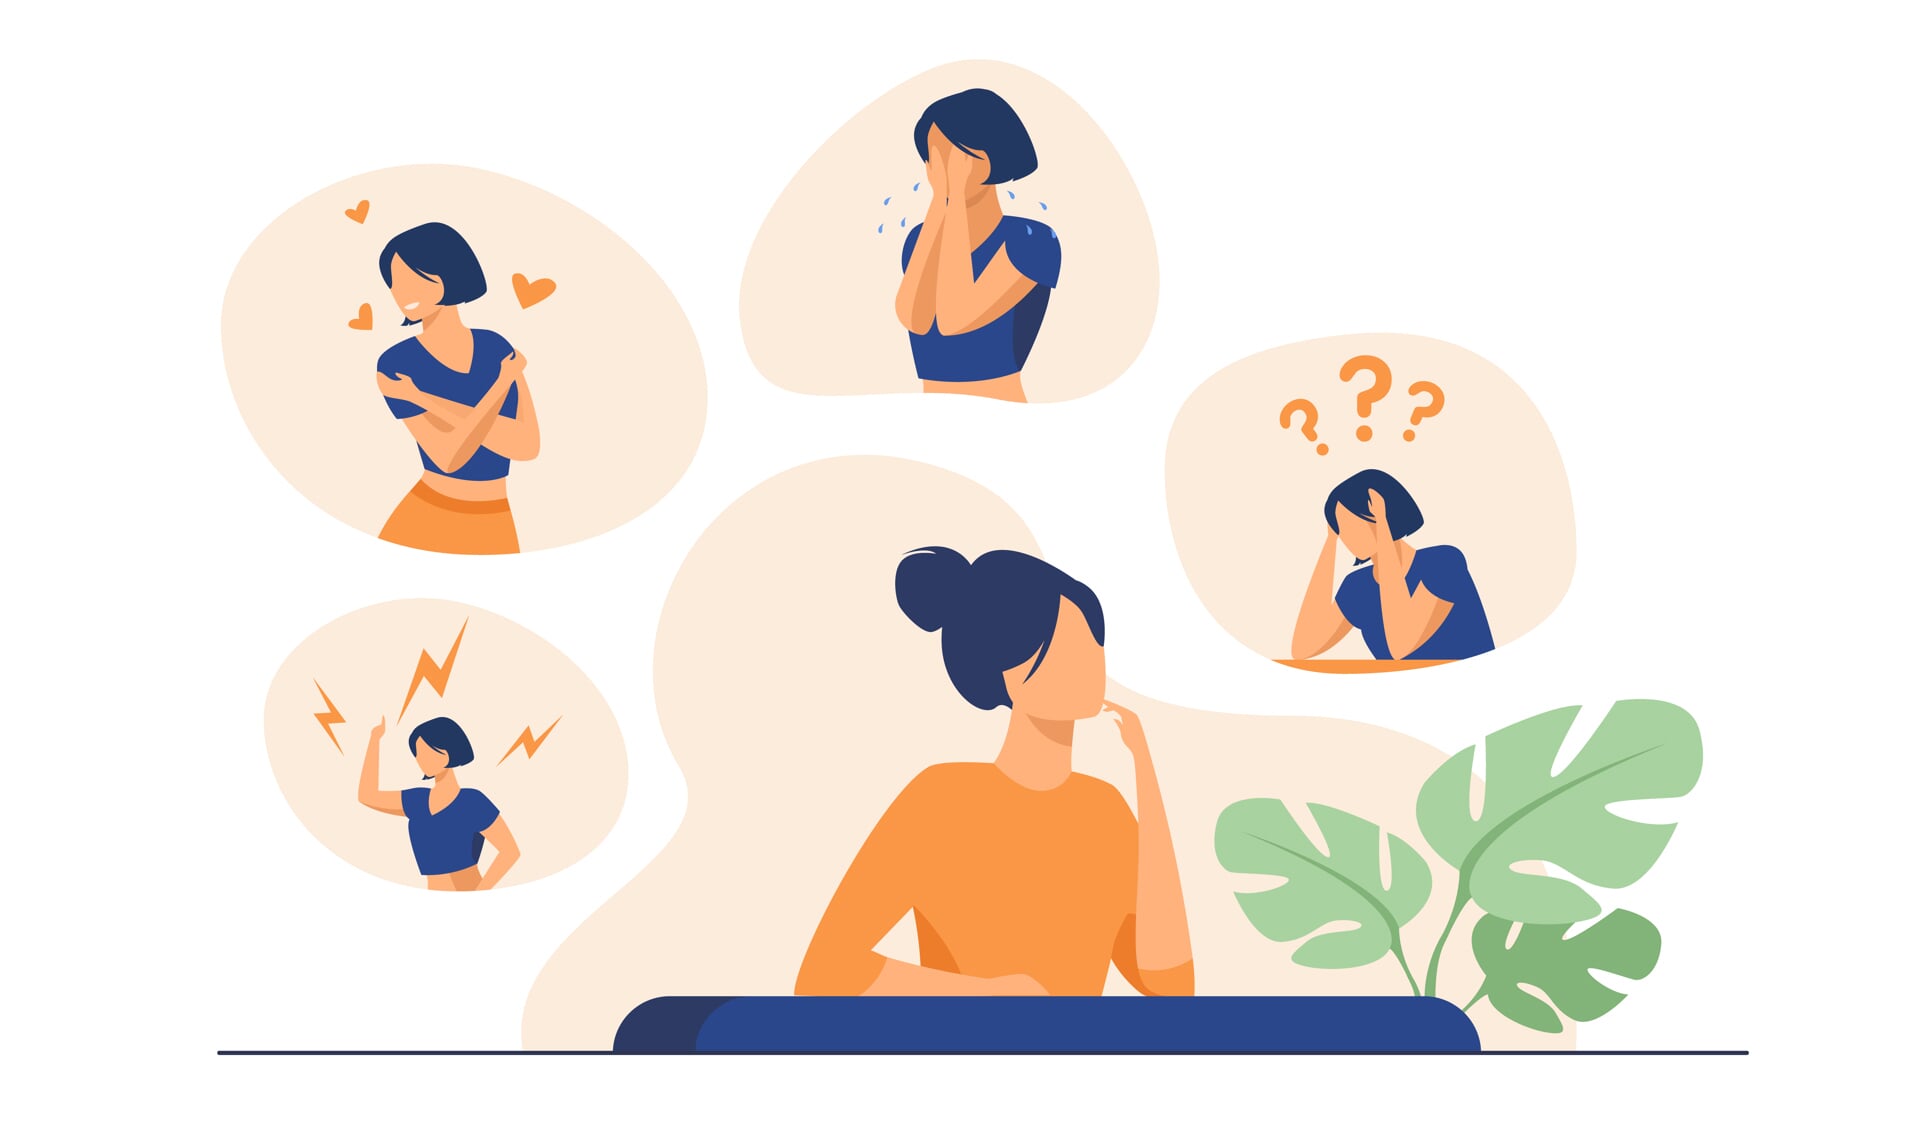 Woman expressing strong various feelings and emotions. Girl suffering from distracted behavior and mood changes. Vector illustration for mental disorder, psychology, stress, crisis concept